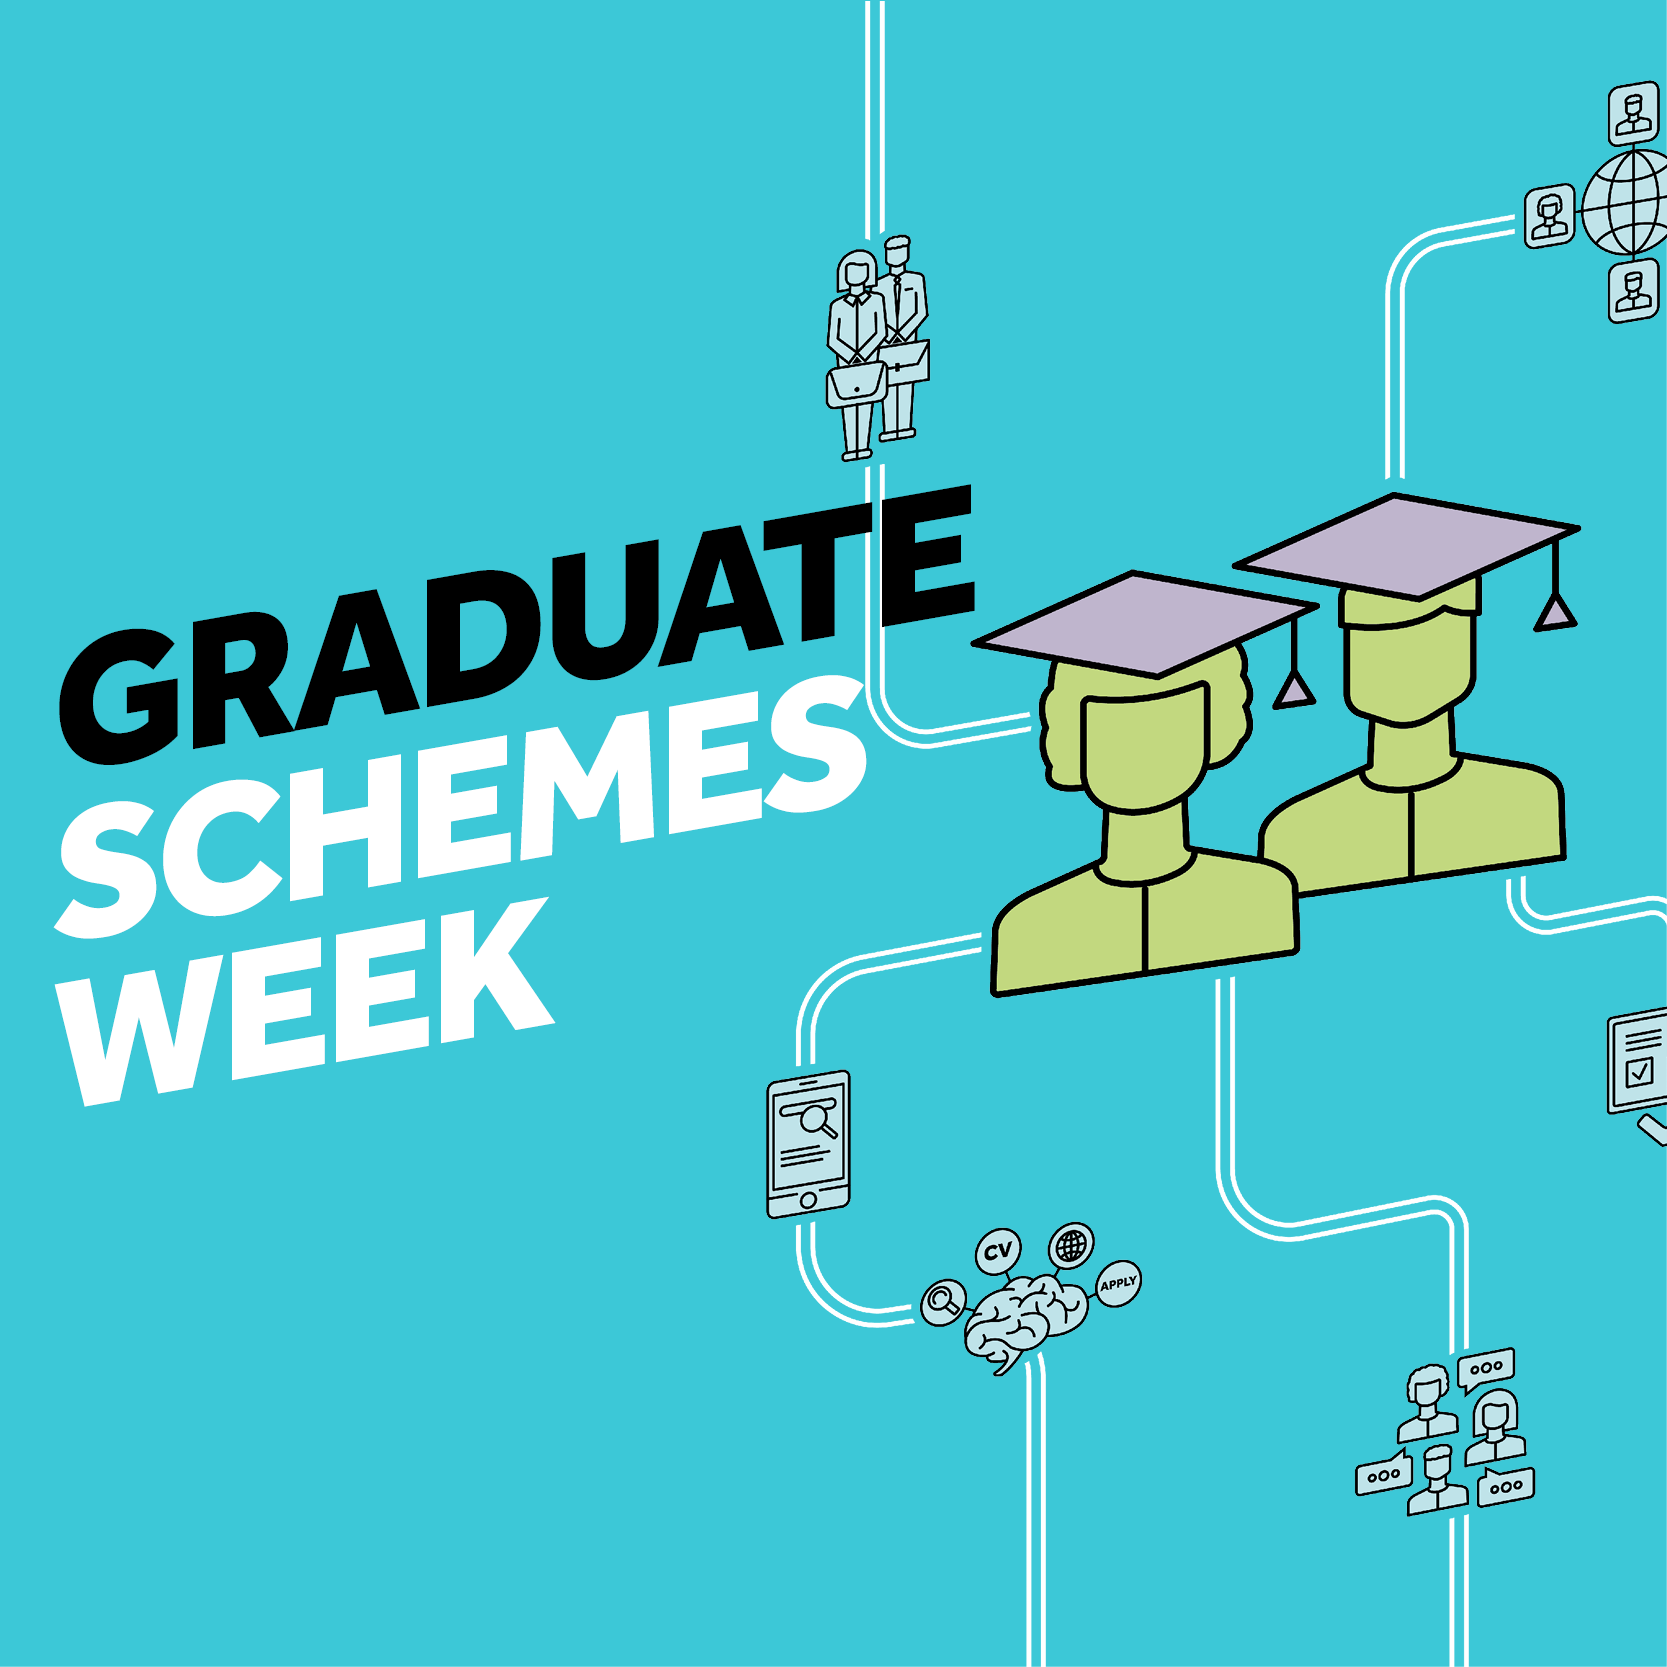 The words Graduate Schemes Week on a blue background with a graphic of a man and woman in graduation mortar boards